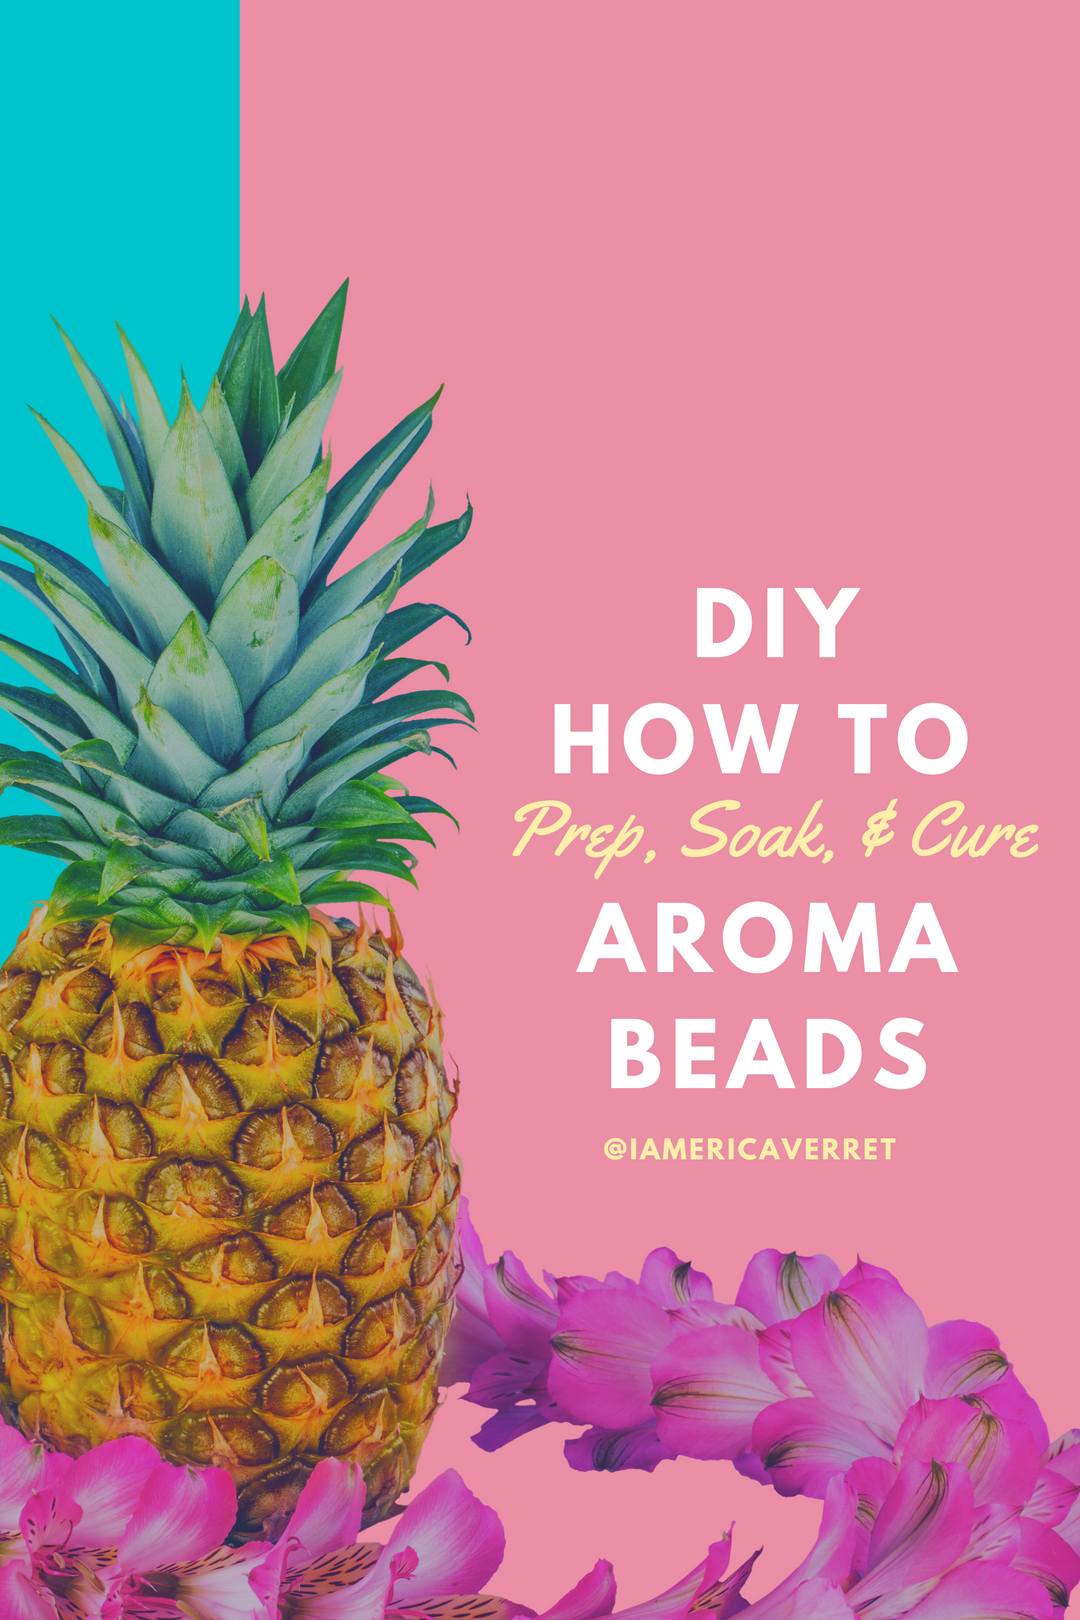 HOW TO PREP, SOAK & CURE AROMA BEADS